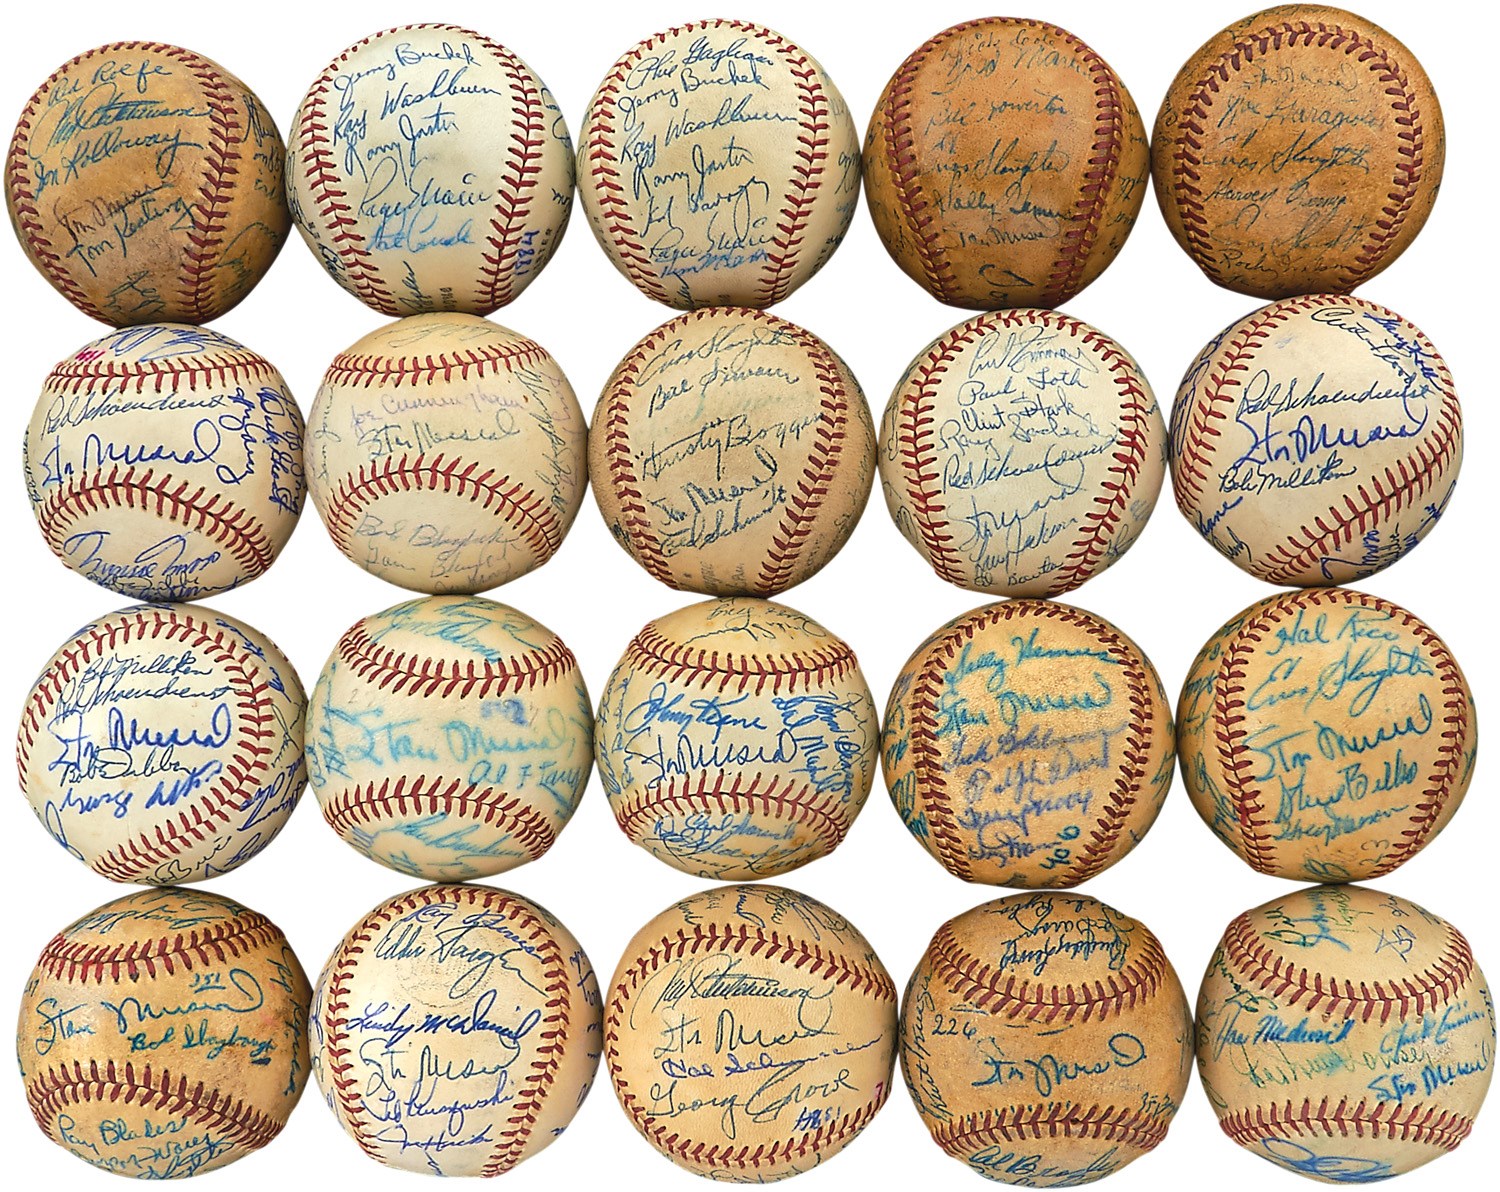 The John O'connor Signed Baseball Collection - 1940s-60s St. Louis Cardinals Team-Signed Baseball Collection (45)